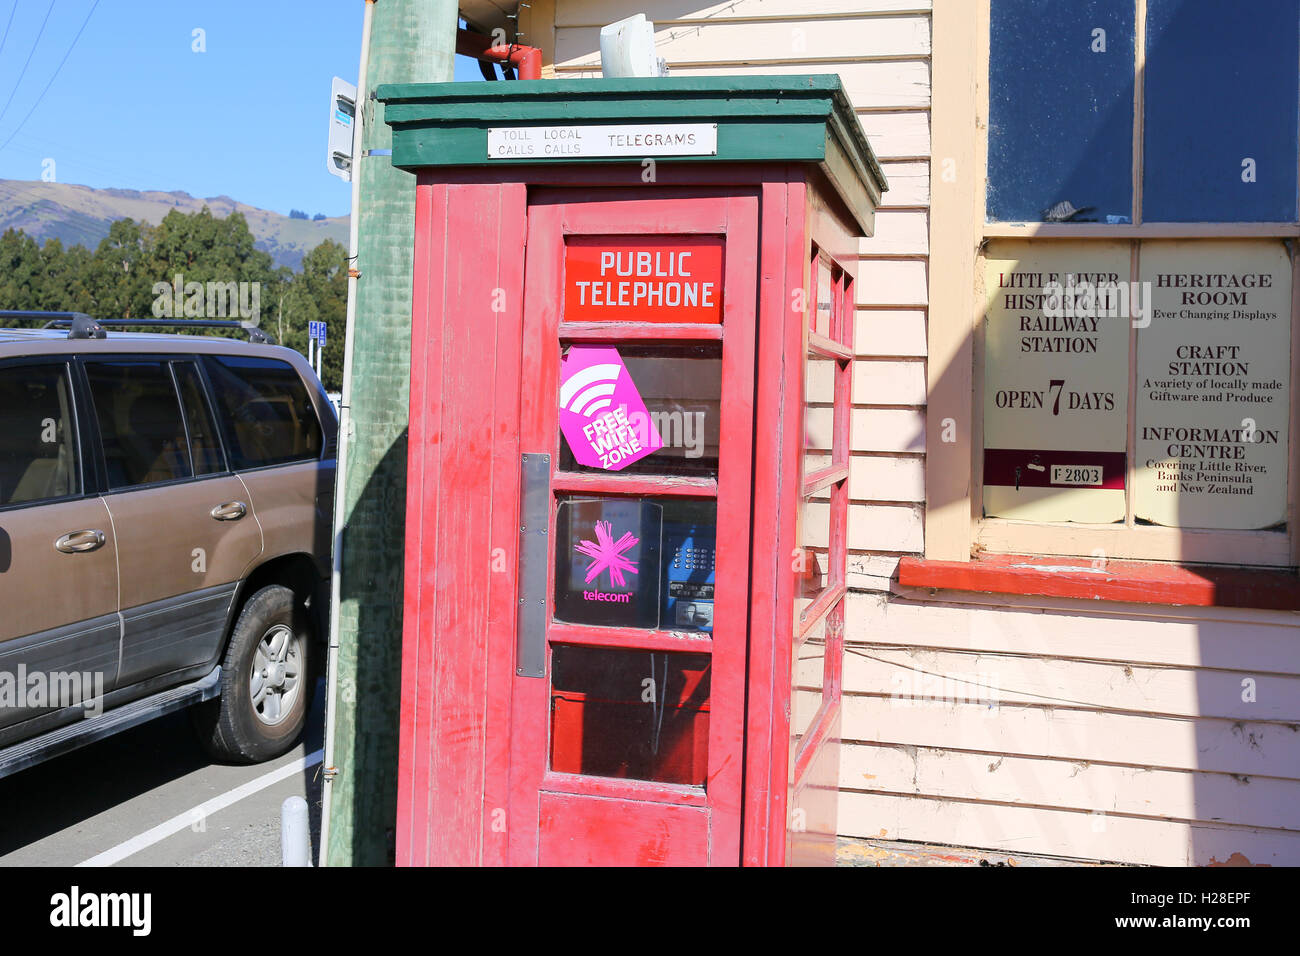 Old meets new. A heritage telephone box with a label proclaiming it as a Free Wi-Fi Zone. Stock Photo